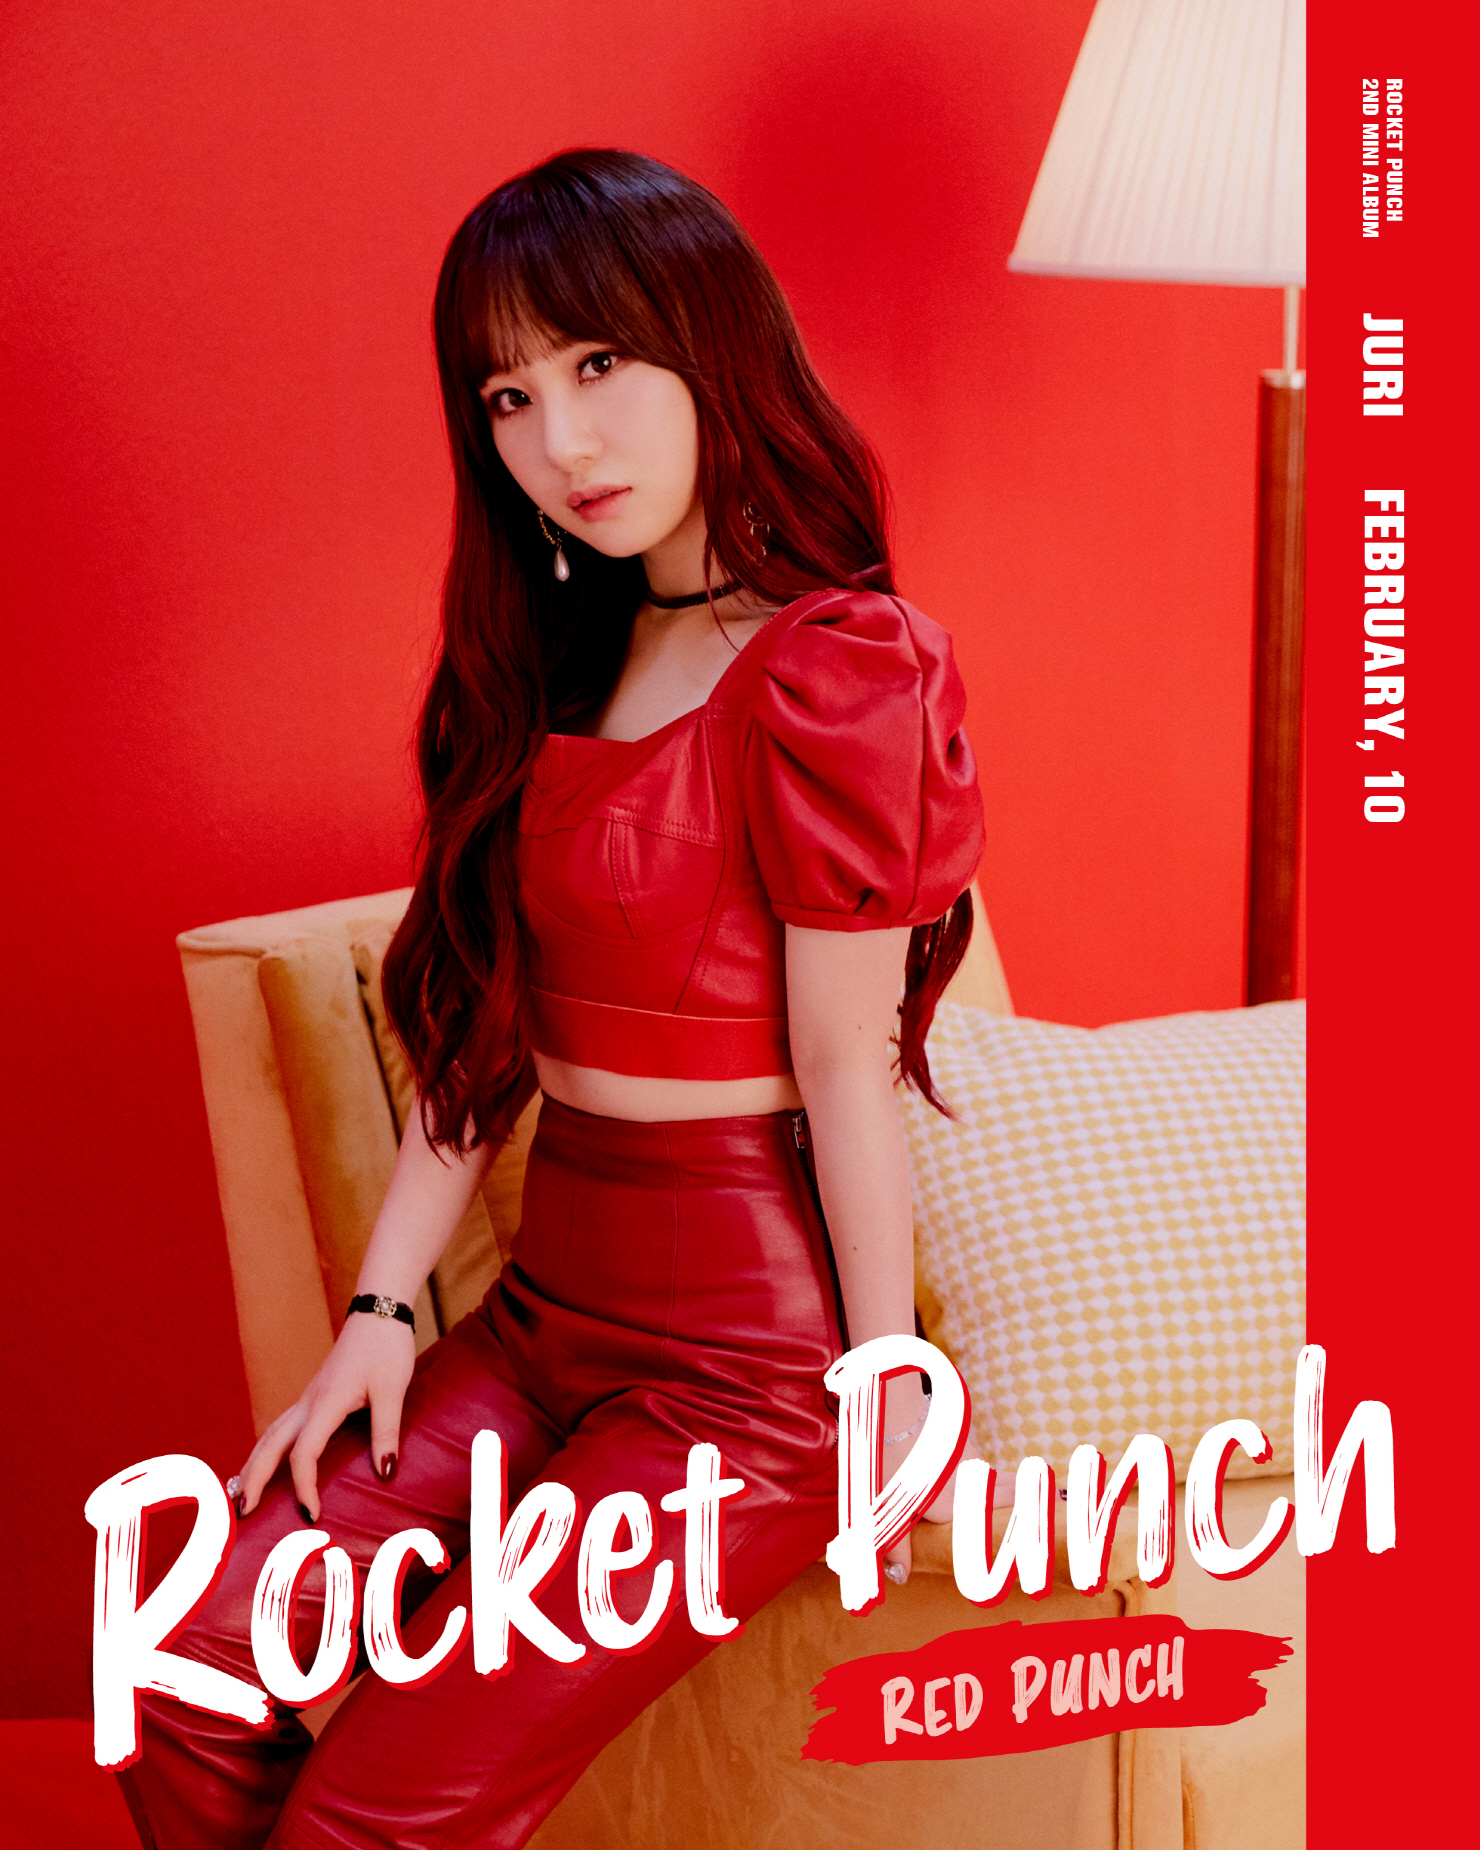 Juri Ueno and Suyuns personal comeback Teaser Image from the group Rocket Punch have been released.On the 31st, Rocket Punch agency Ullim Entertainment released its personal concept photo and moving poster of its second mini album RED Punch (RED PUNCH) through official SNS.Juri Ueno, Suyun in the public concept photo maximized the charm of Rocket Punch in the costume that gave the point to RED.Juri Ueno and Suyun in the moving poster video released with the concept photo showed bright energy and dignified charm at the same time, and they gave a new look that was not seen before, raising questions about the new album.iMBC Cha Hye-mi  Photos